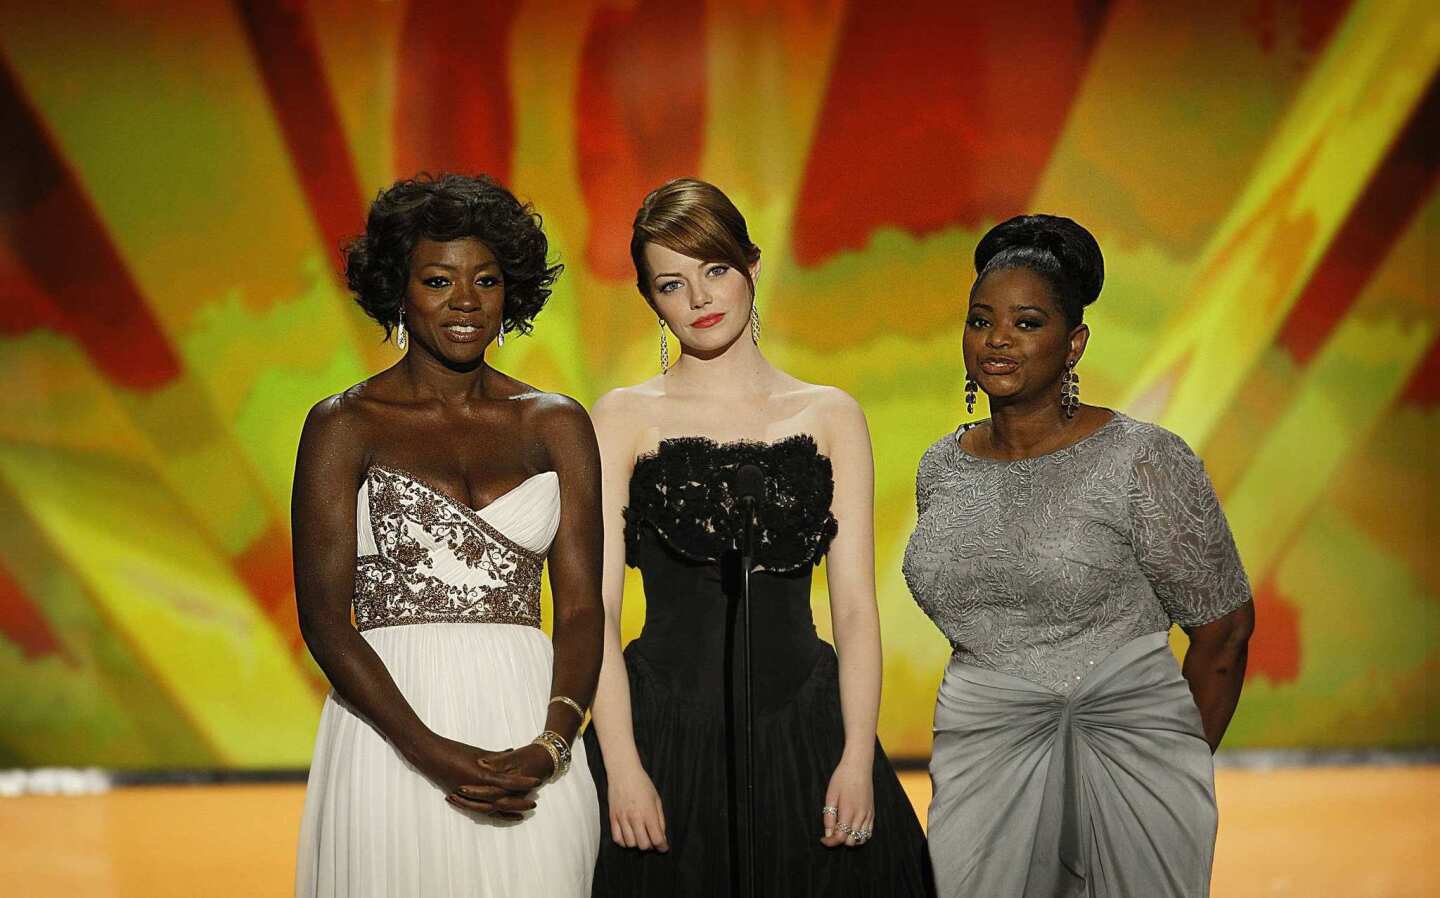 Actresses Viola Davis, Emma Stone and Octavia Spencer assemble onstage to present their film, "The Help," for the evening's top award.